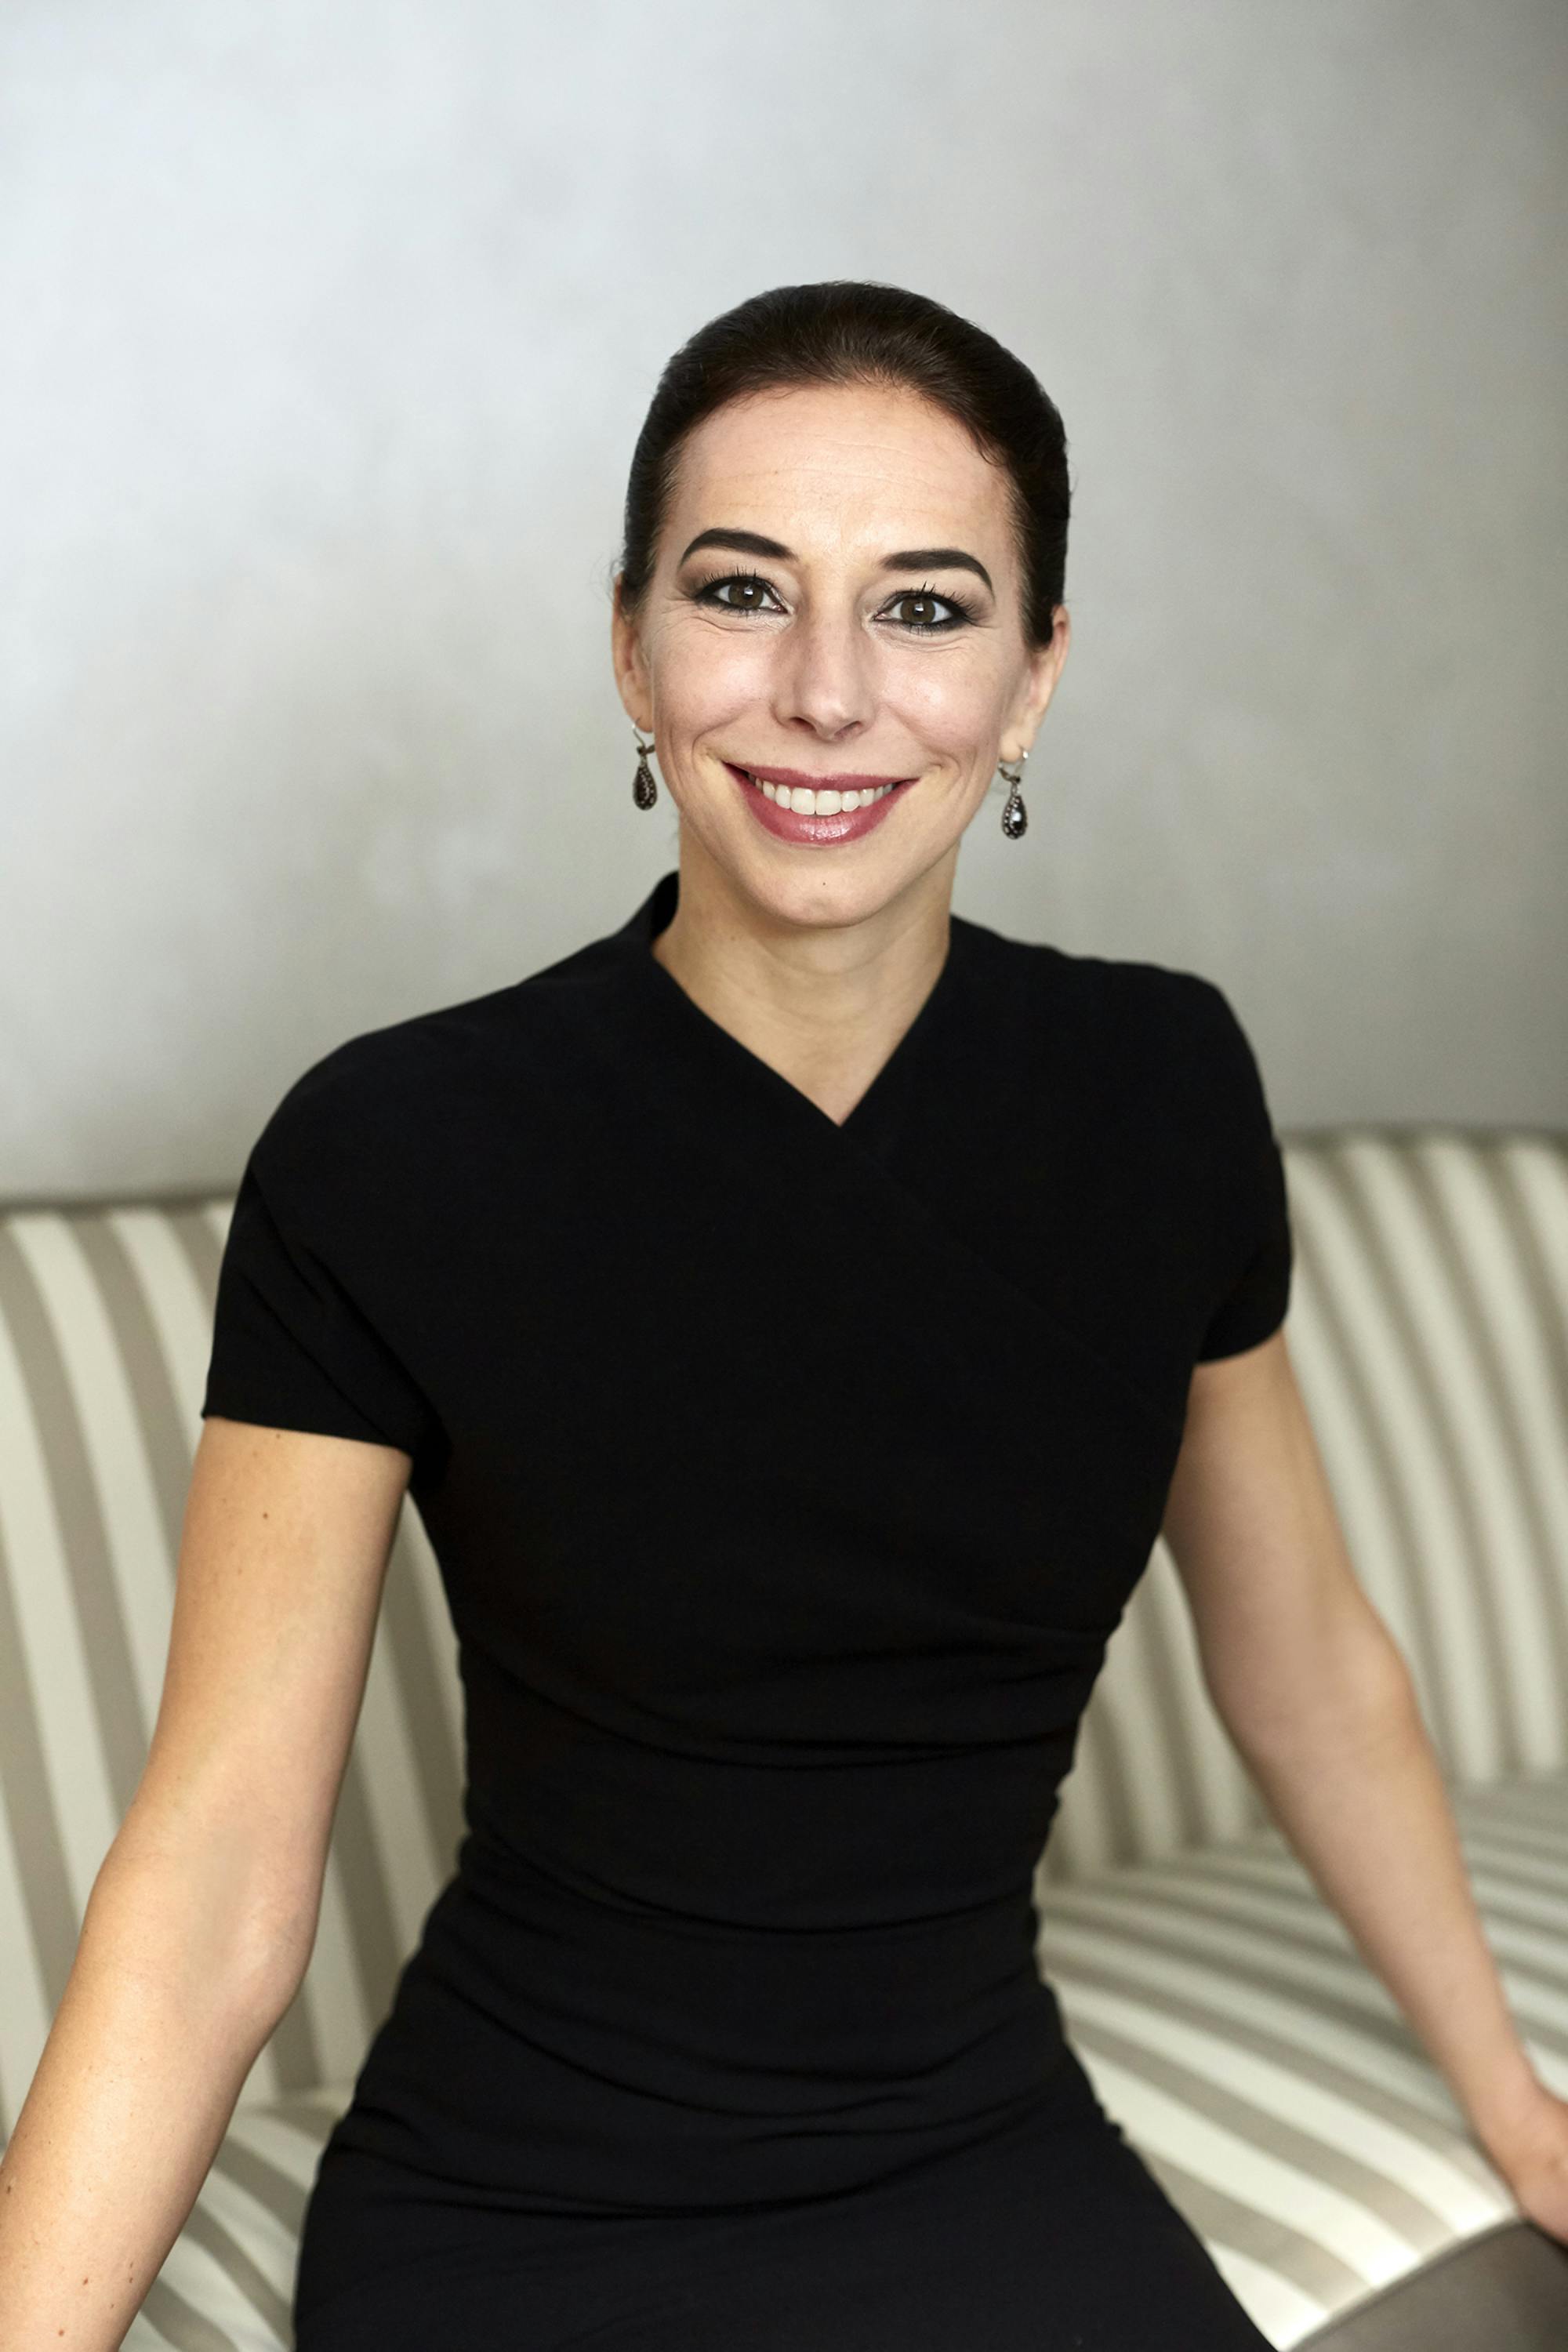 Walpole Interview 10 Questions. 10 CEOs. Supporting the Next Generation of Leaders: An Interview with Kristina Blahnik, CEO, Manolo Blahnik 